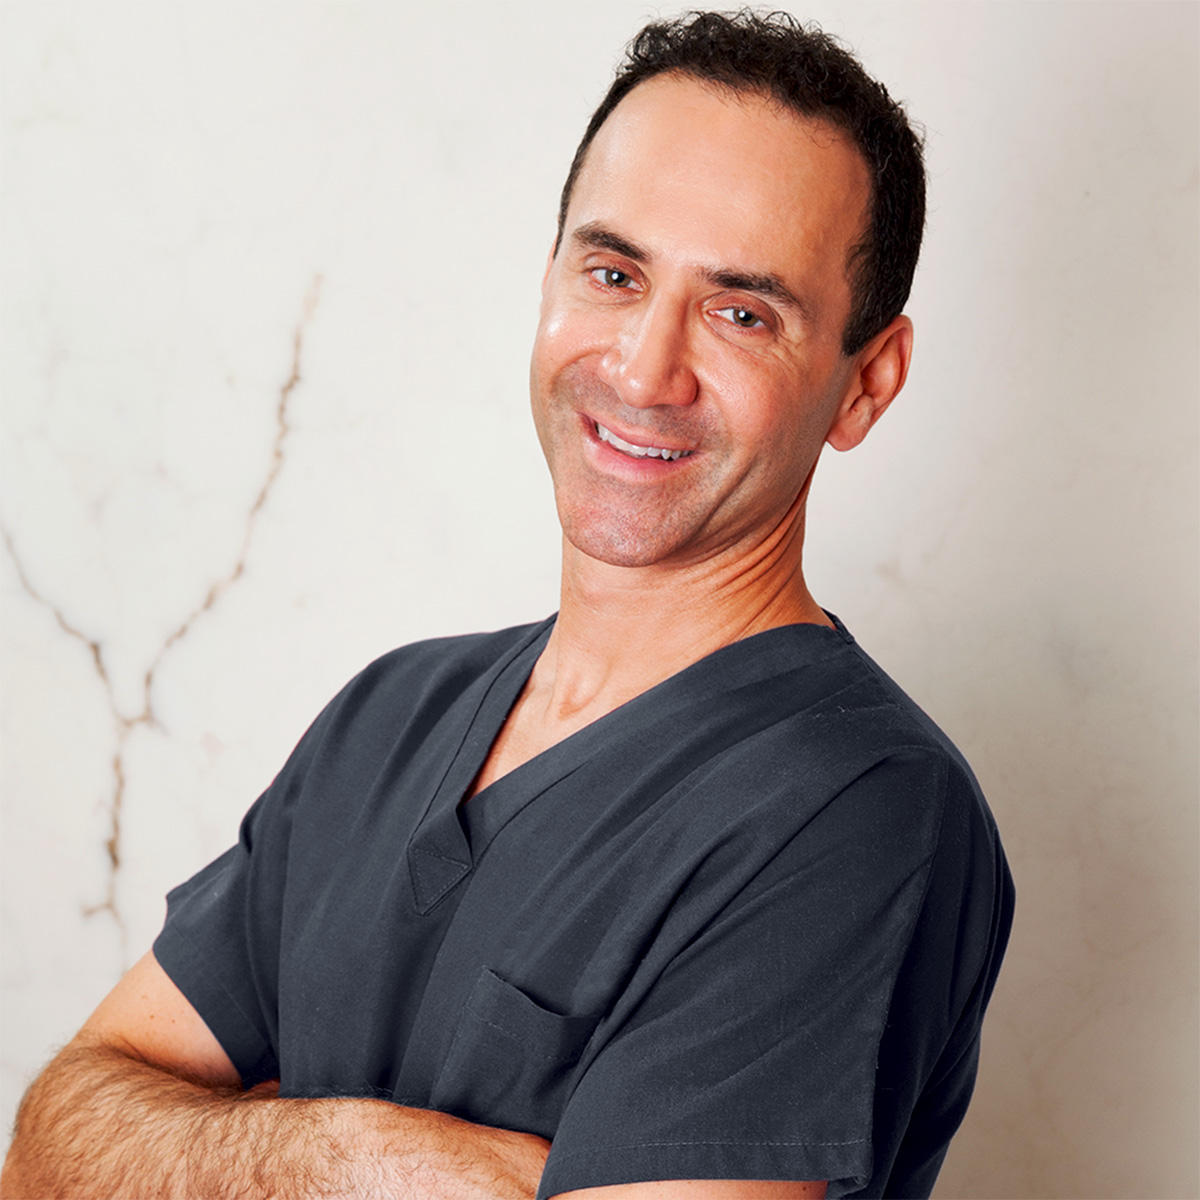 Dr. Elie Levine is a renowned board certified plastic surgeon who has been repeatedly named a “Top Doctor” by Castle Connolly and New York Super Doctors. An expert in all areas of plastic, reconstructive, and cosmetic surgery, Dr. Levine offers facial plastic surgery, breast surgery, body contouring, PRP for hair loss, and much more. With his extensive knowledge of plastic surgery, Dr. Levine is able to work side-by-side with our dermatologists to enhance patient results.